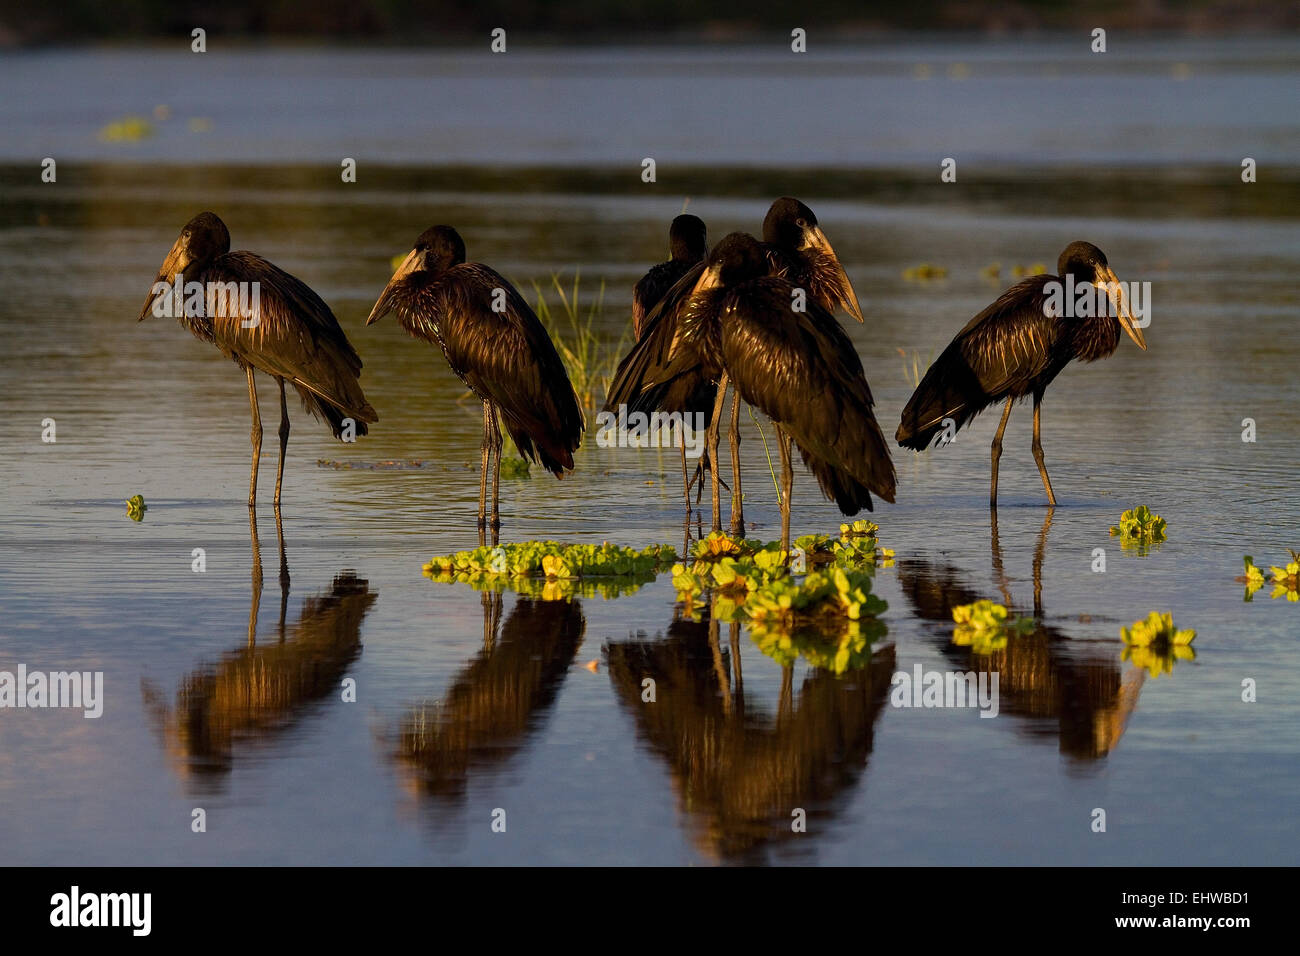 Several African openbill (Anastomus lamelligerus) resting in a shallow river, with a reflection. Stock Photo